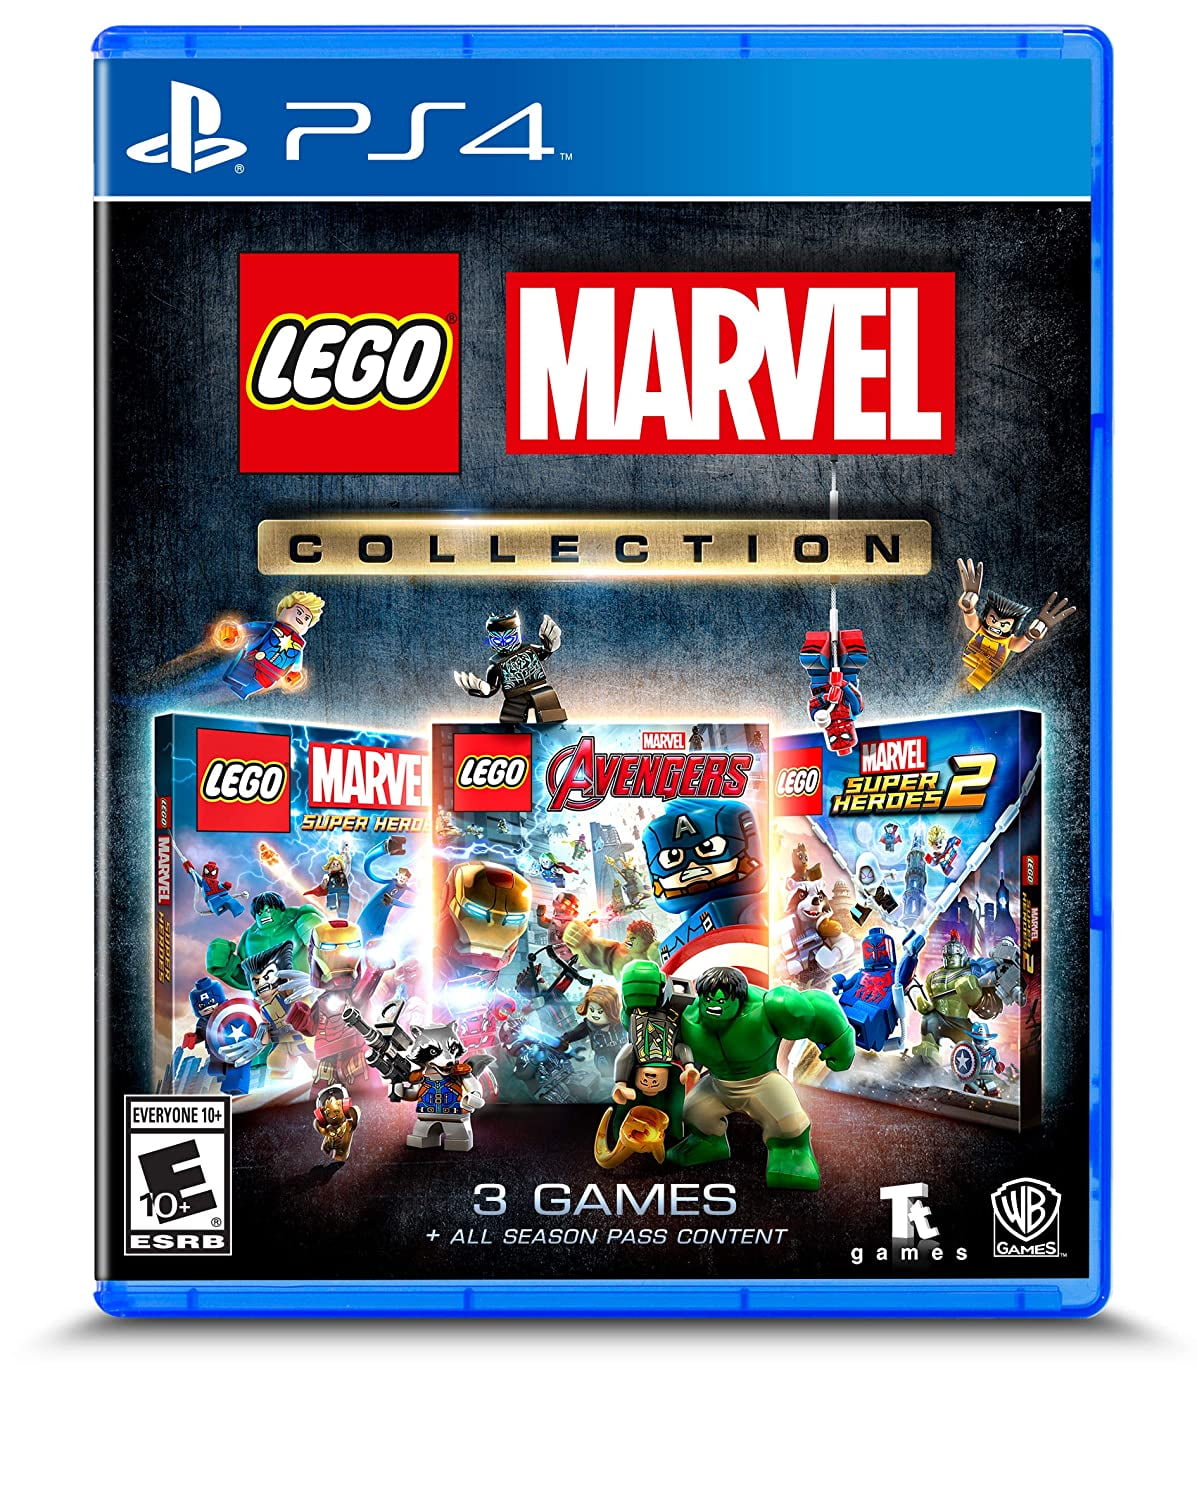 loose the temper money flower The LEGO Marvel Collection - PlayStation 4 - Walmart.com